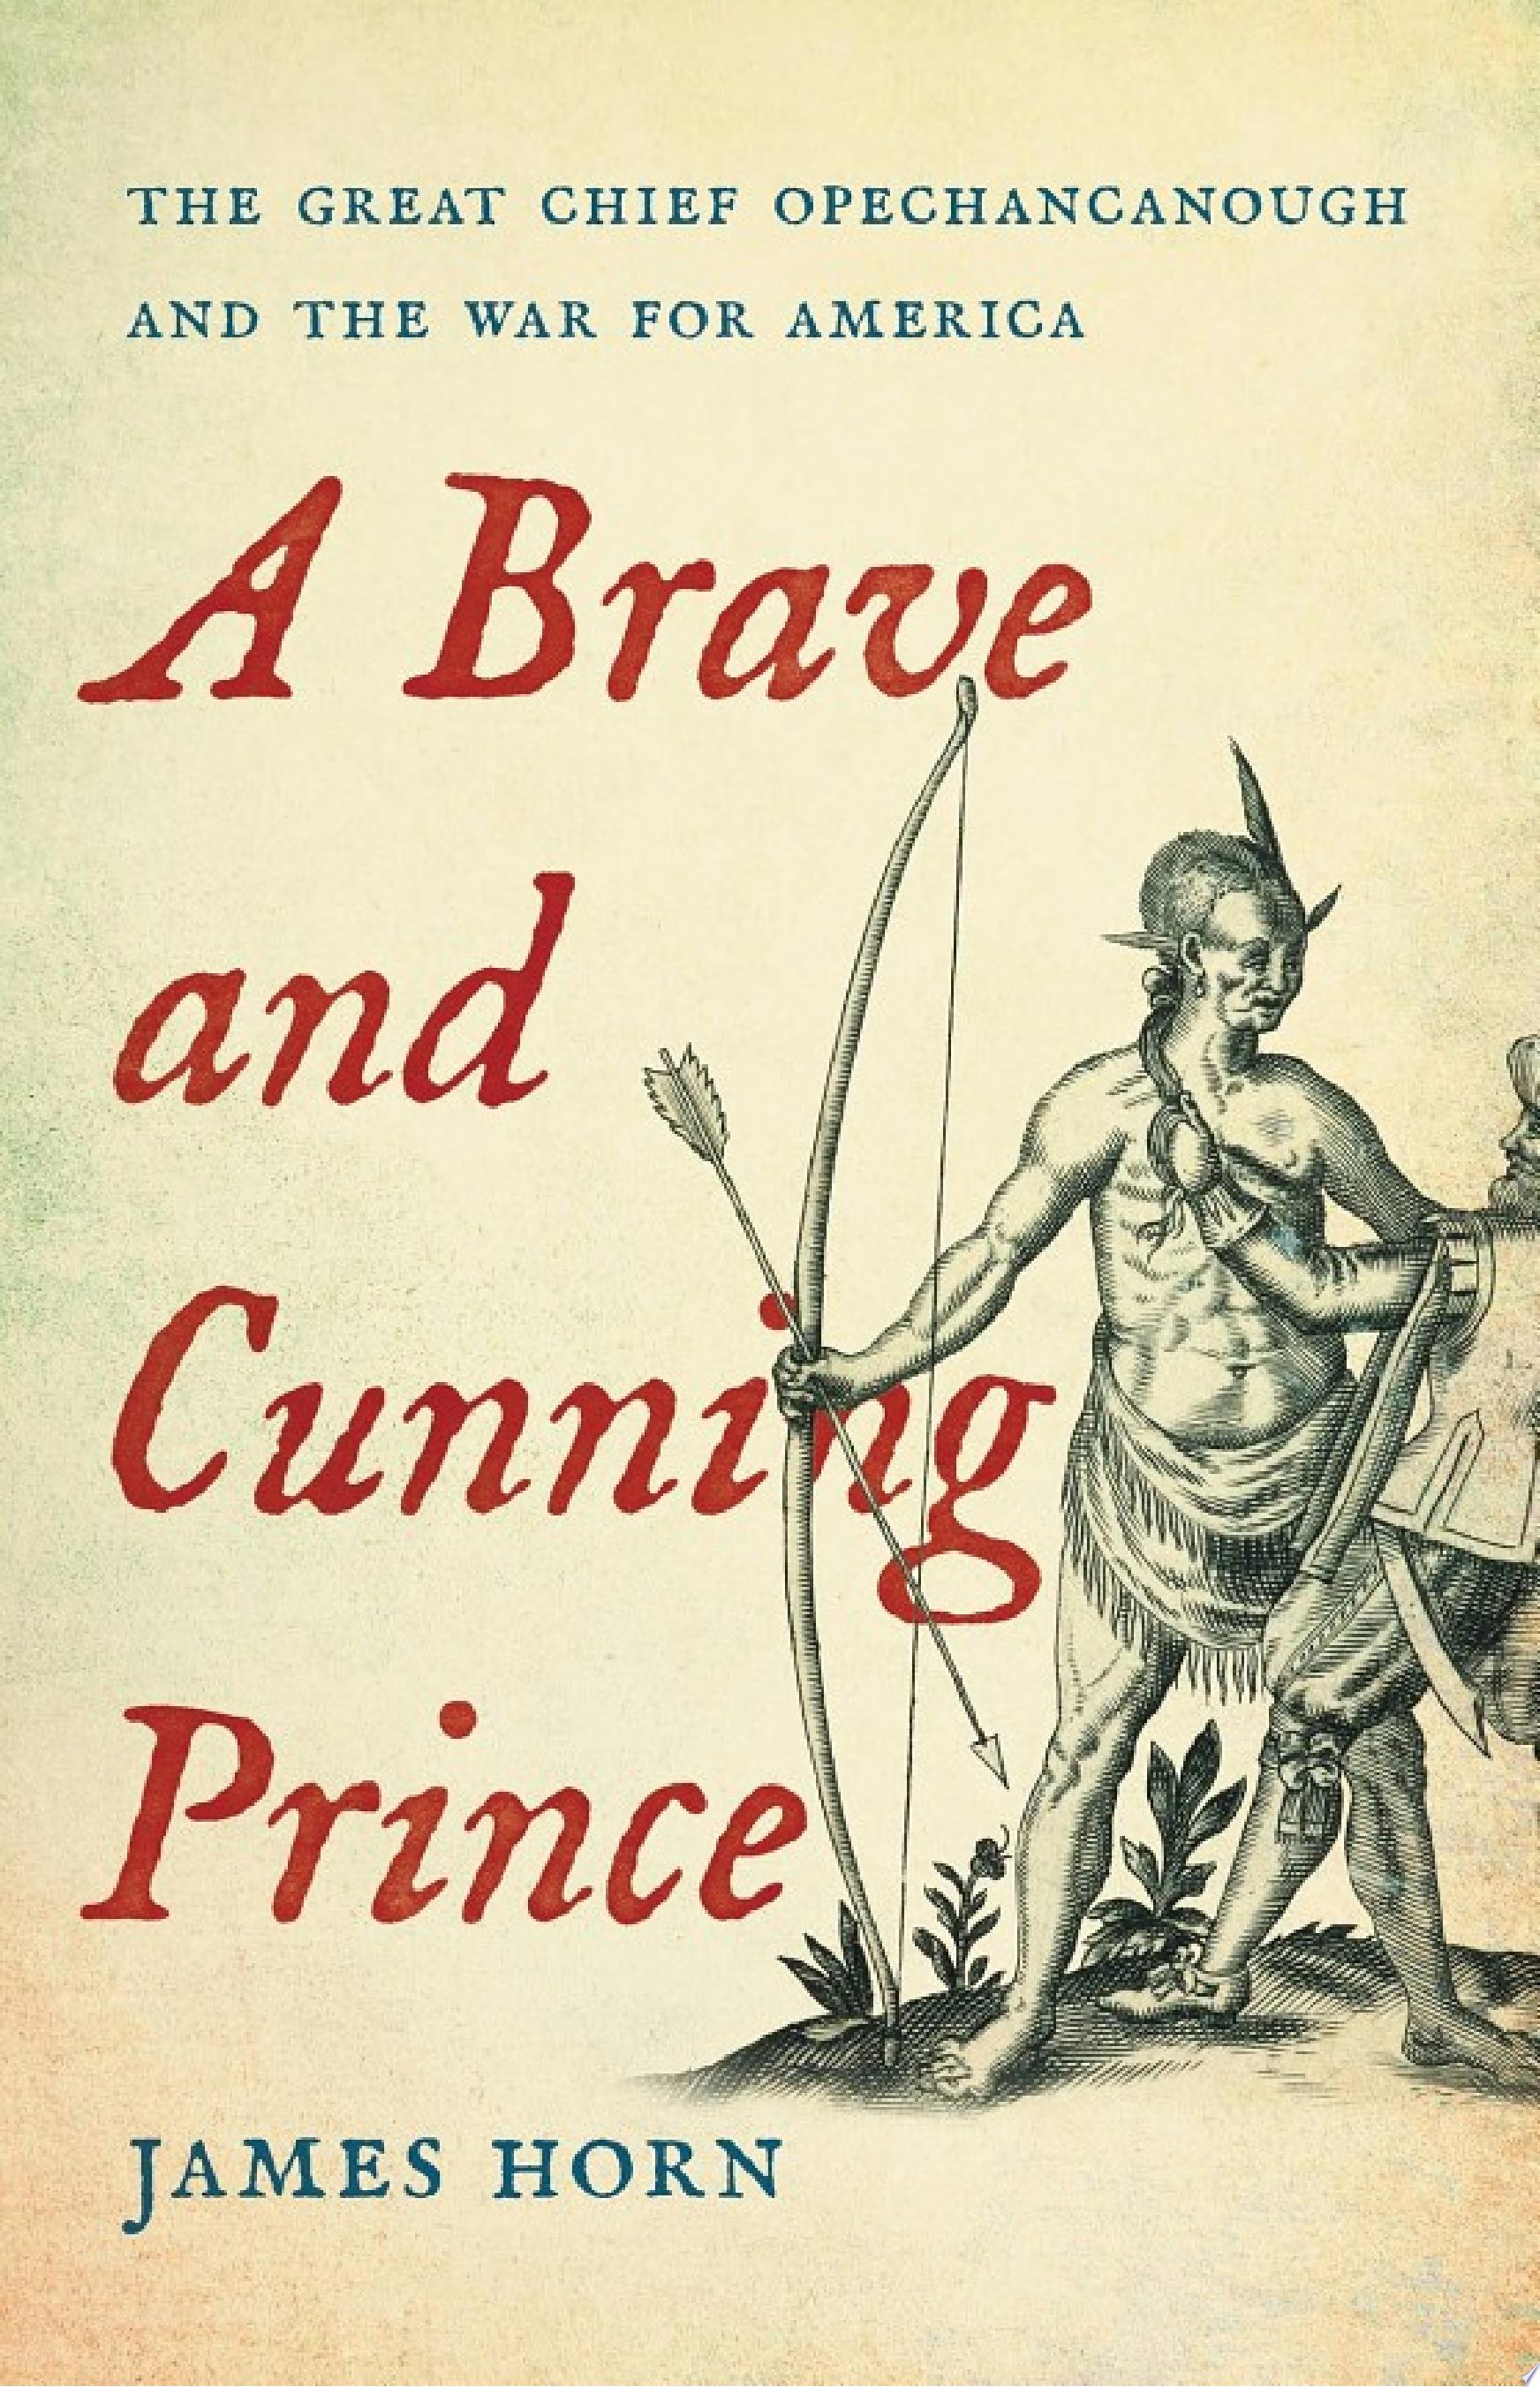 Image for "A Brave and Cunning Prince"